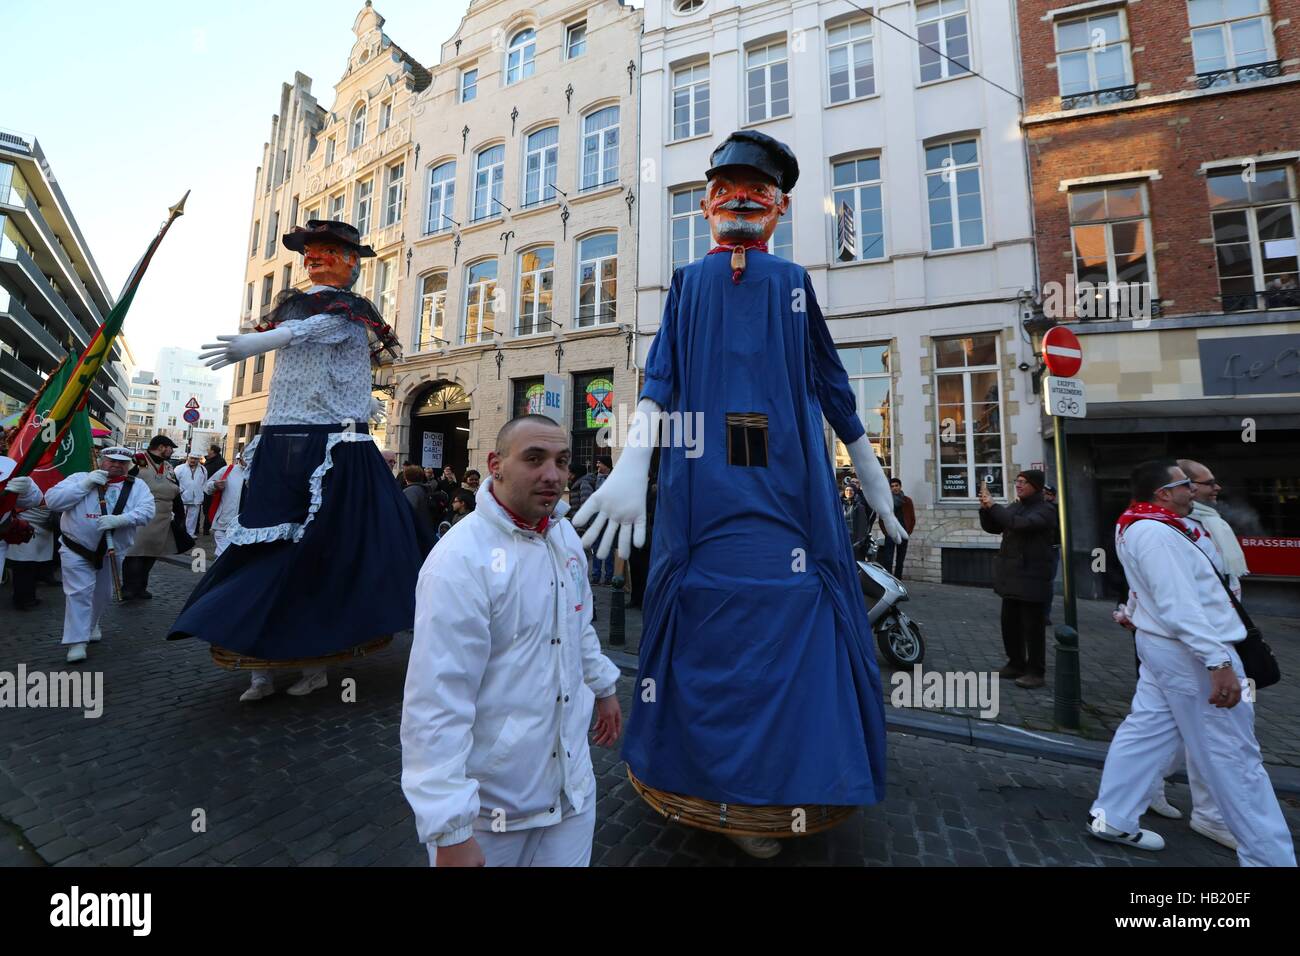 Brussels, Belgium. 3rd Dec, 2016. People participate in the Saint-Nicolas Parade in Brussels, Belgium, Dec. 3, 2016. Saint-Nicolas, who is one of the sources of the popular Christmas icon of Santa Claus, is celebrated annually on the Saint Nicholas Day. Credit:  Gong Bing/Xinhua/Alamy Live News Stock Photo